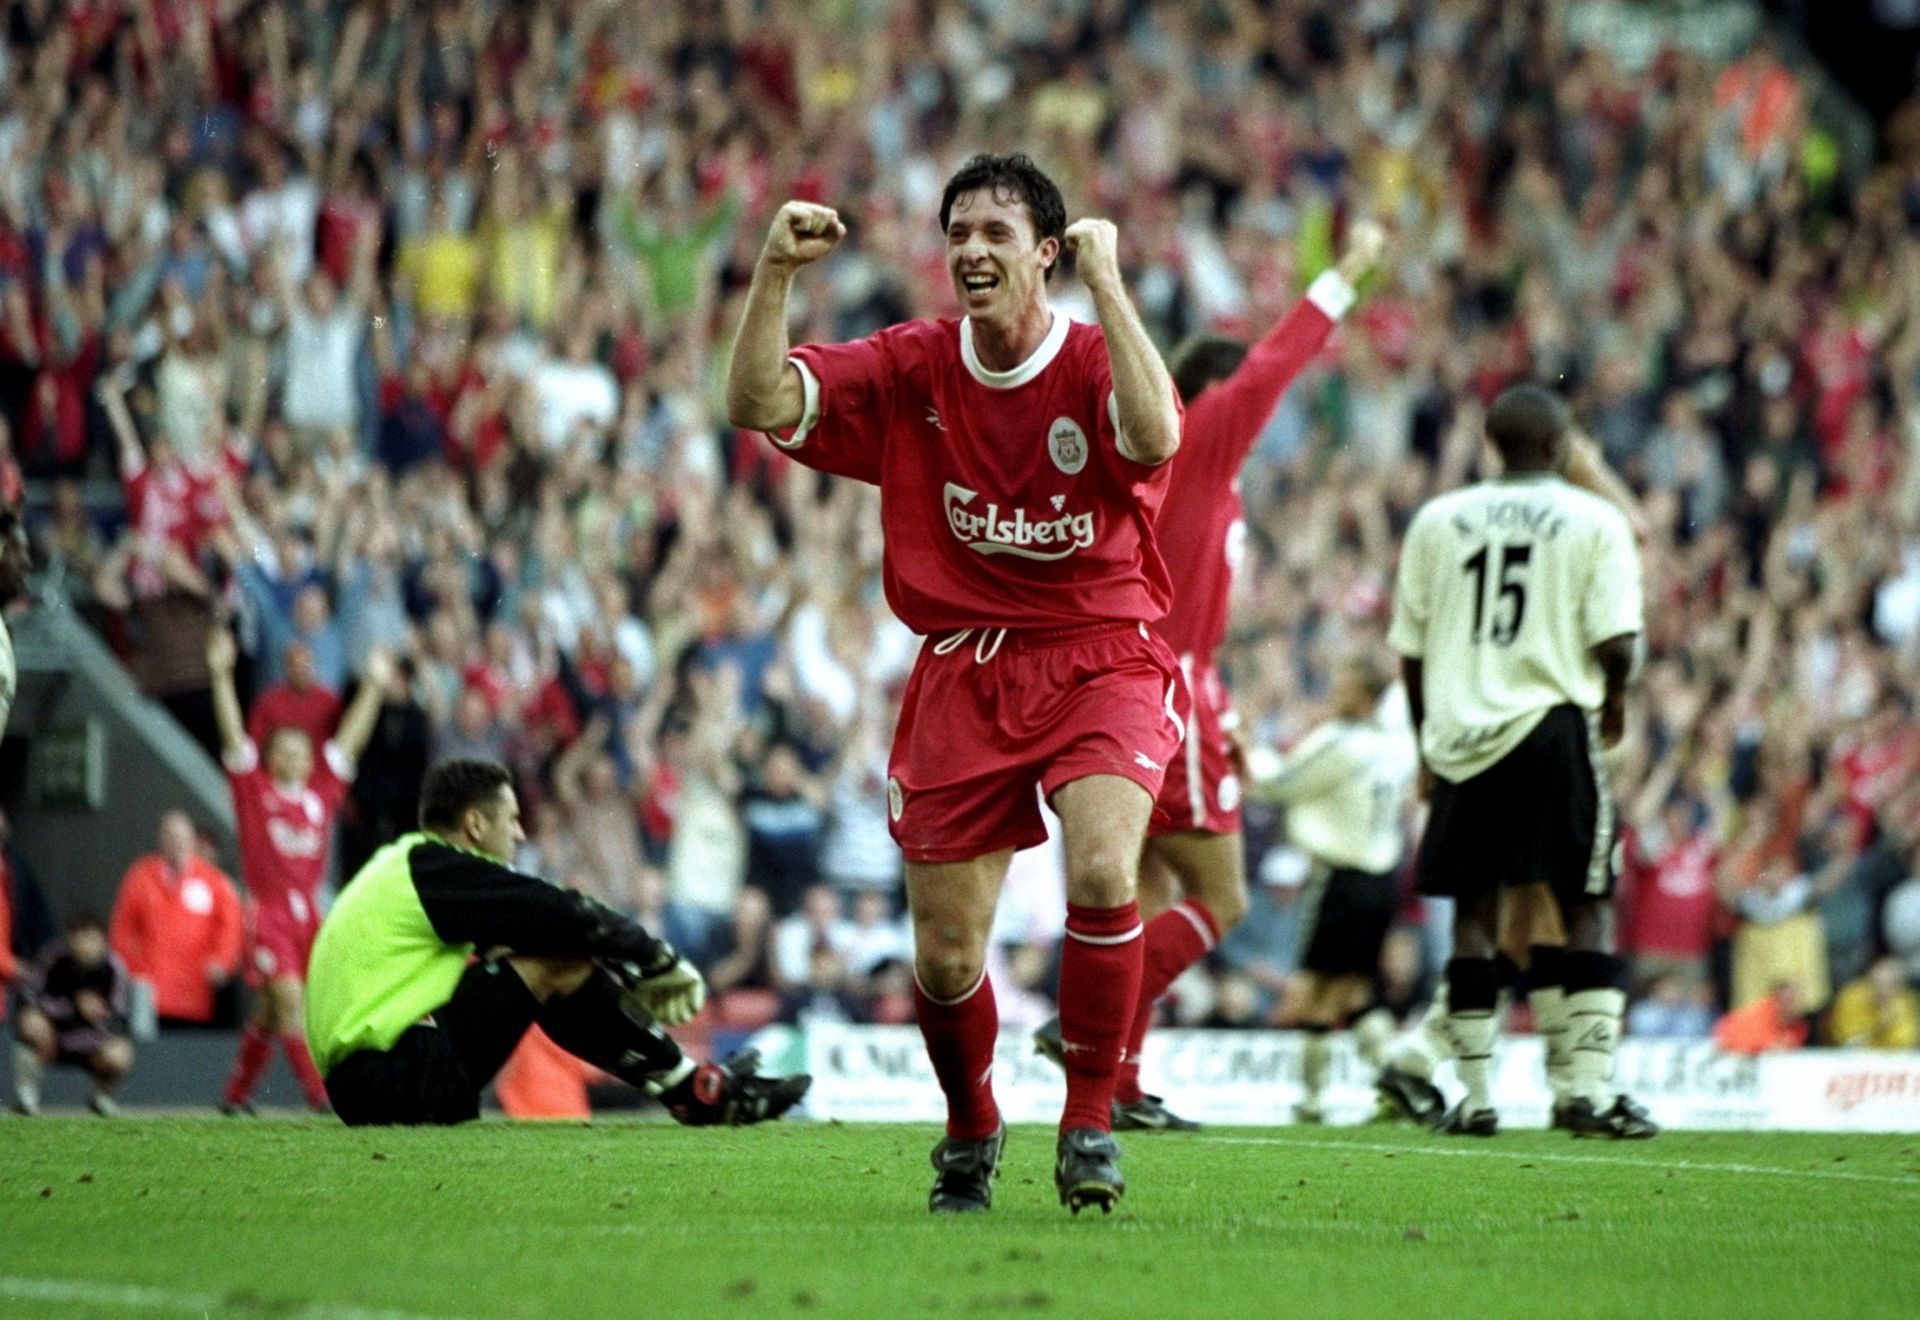 Robbie Fowler of Liverpool